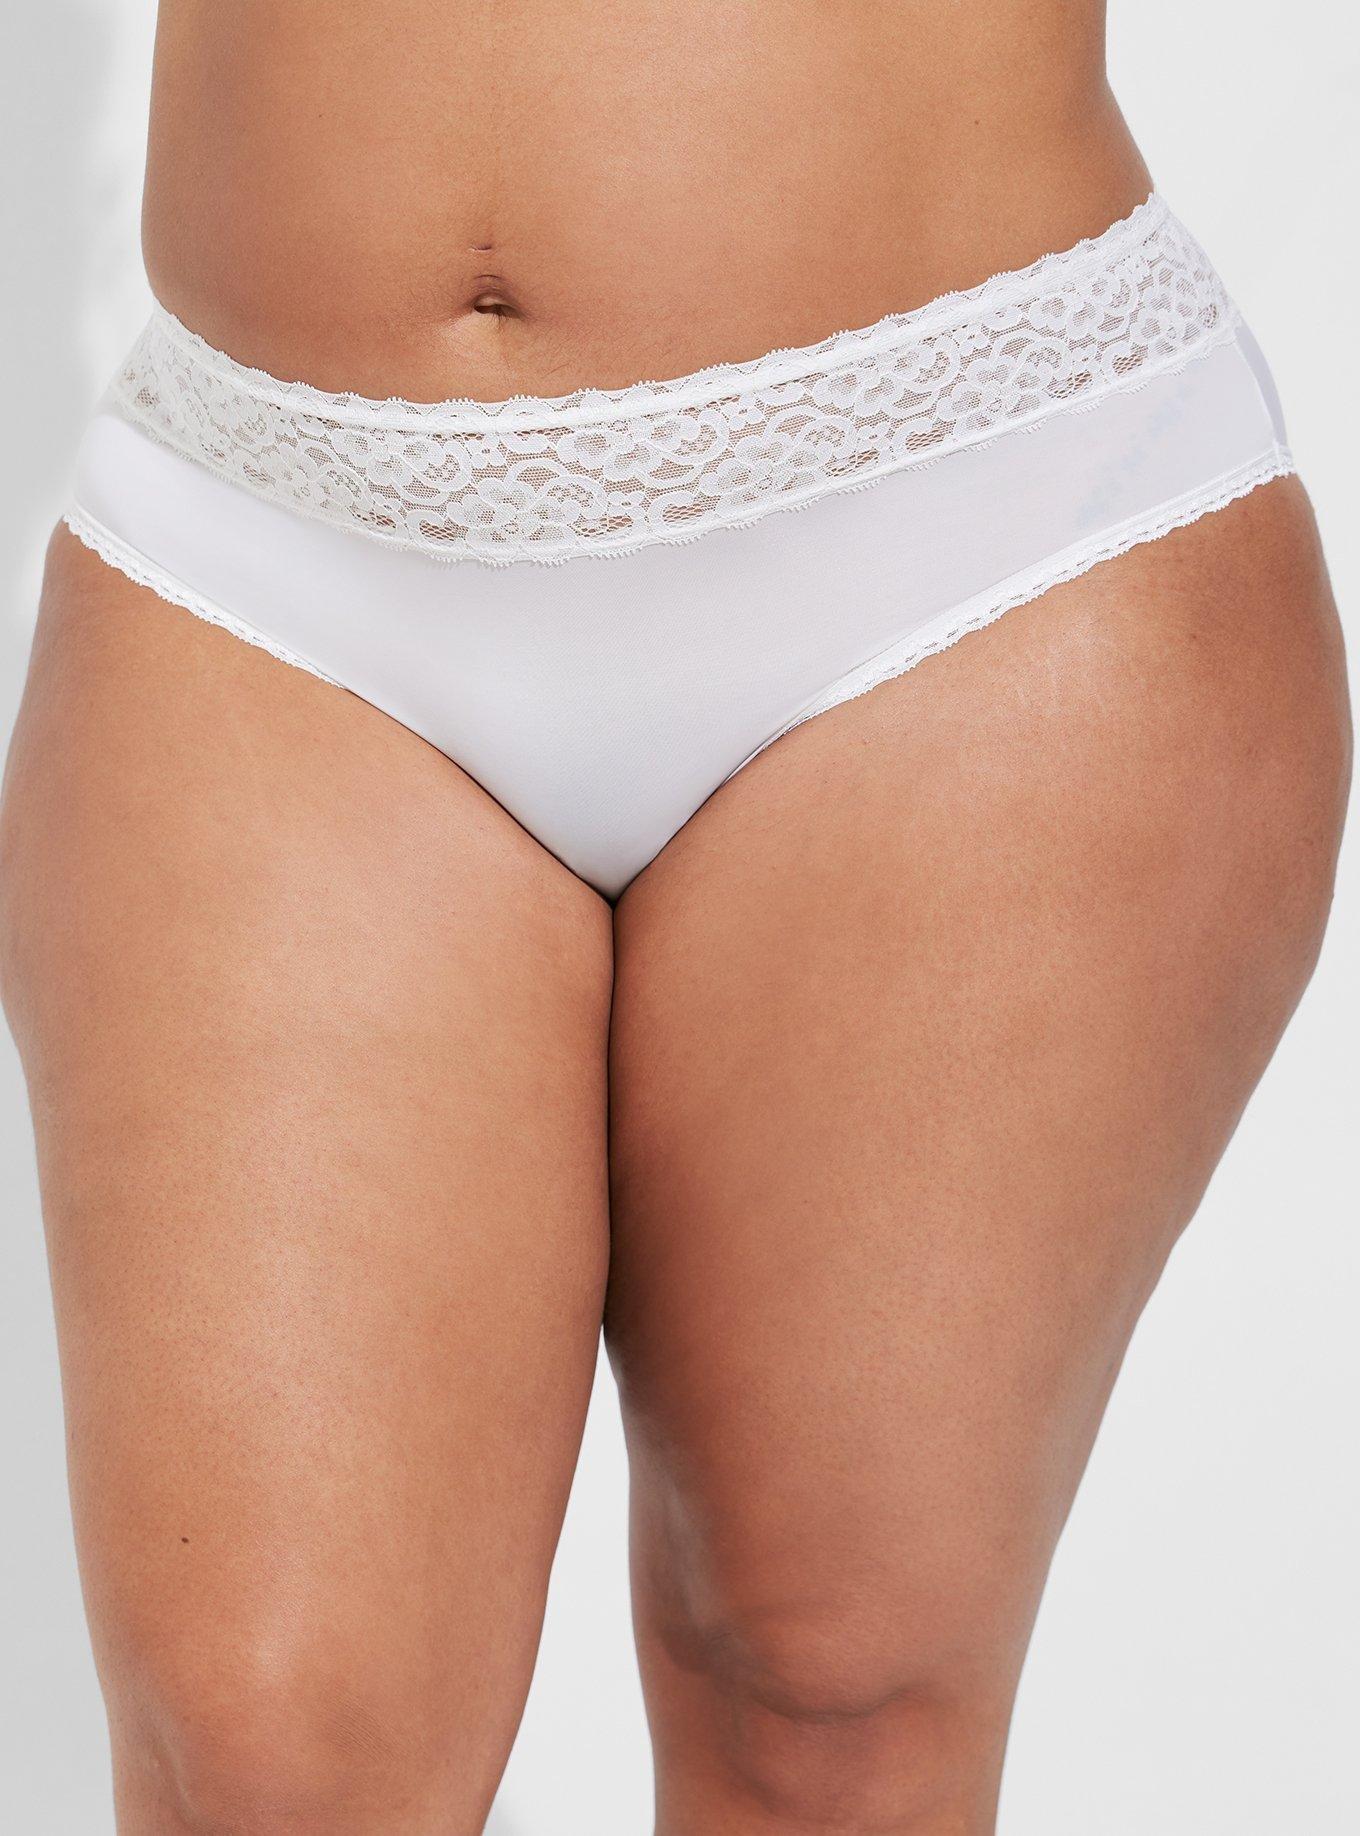 Lingerie Plus Size Strapless Tops White Lace Knickers Snag Tights